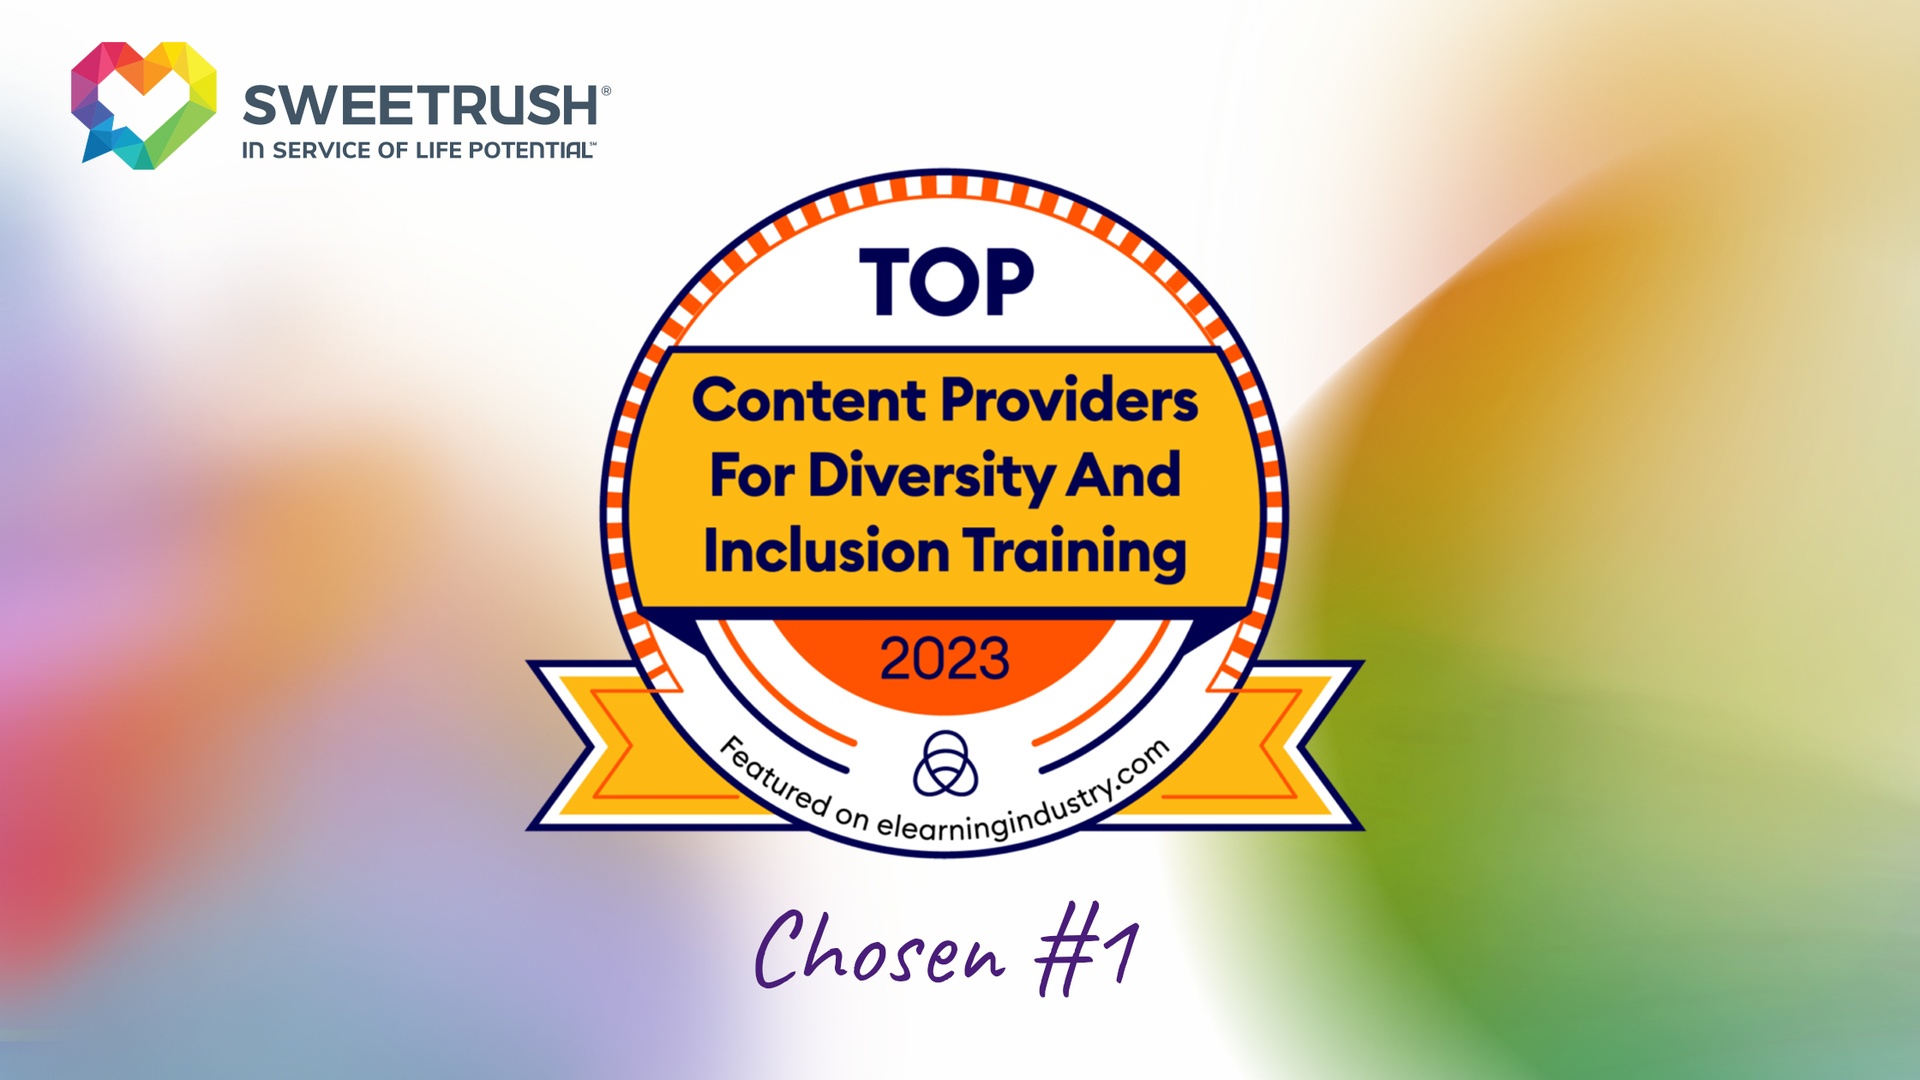 SweetRush: No. 1 Diversity And Inclusion Training Provider